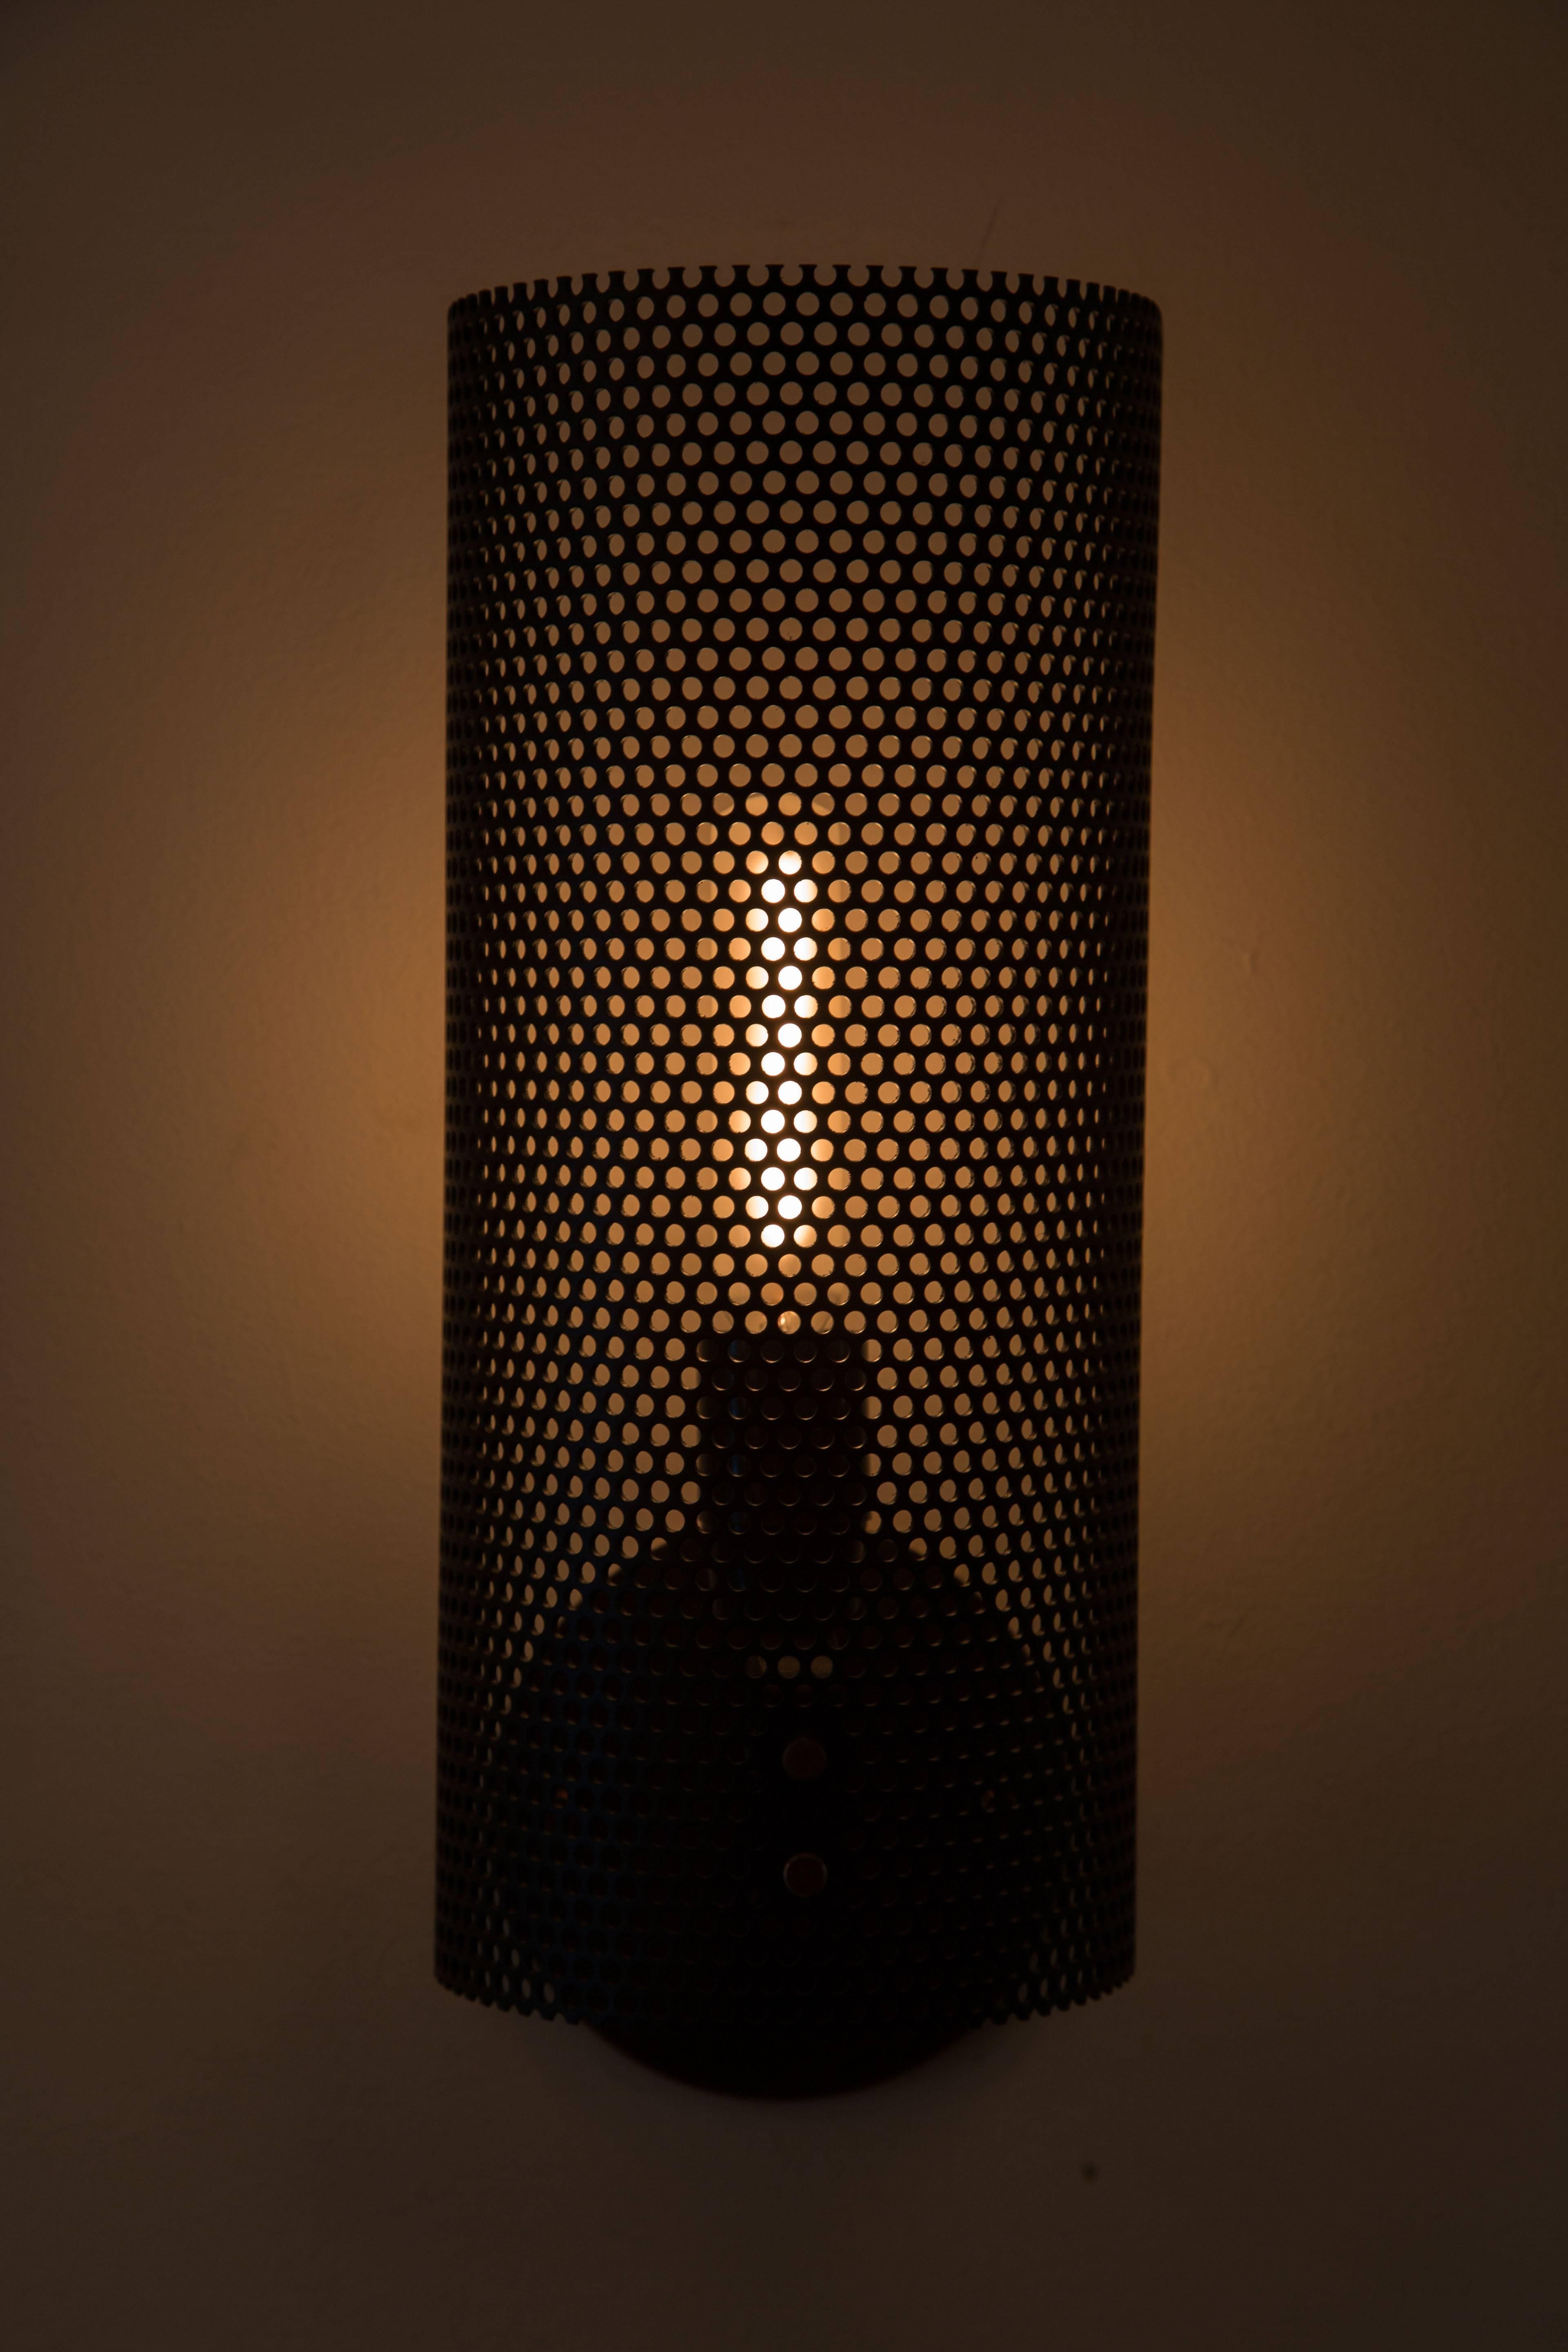 Rewire Custom Perforated Sconce. Sconces can be powder coated in various colors. Requires one E26 60w maximum bulb. Priced and sold individually.